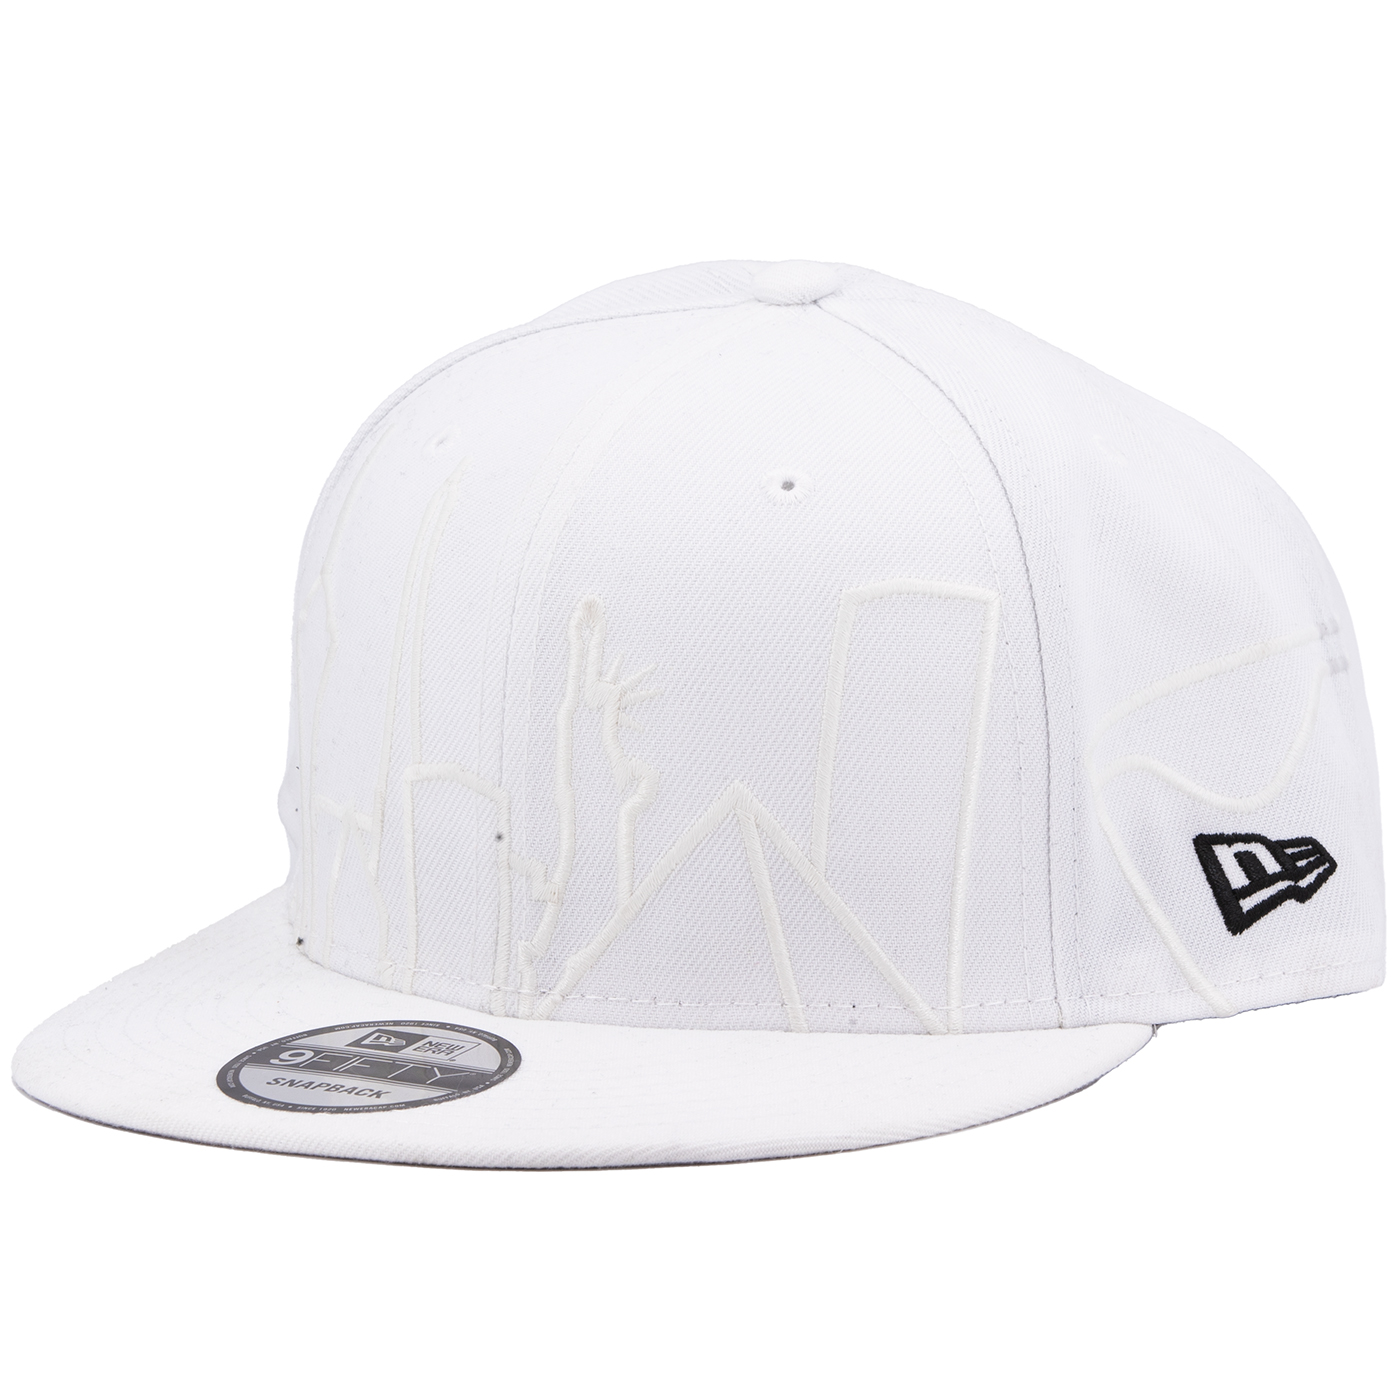 Product Detail NEW 9FIFTY RAIDER SKYLINE CAP